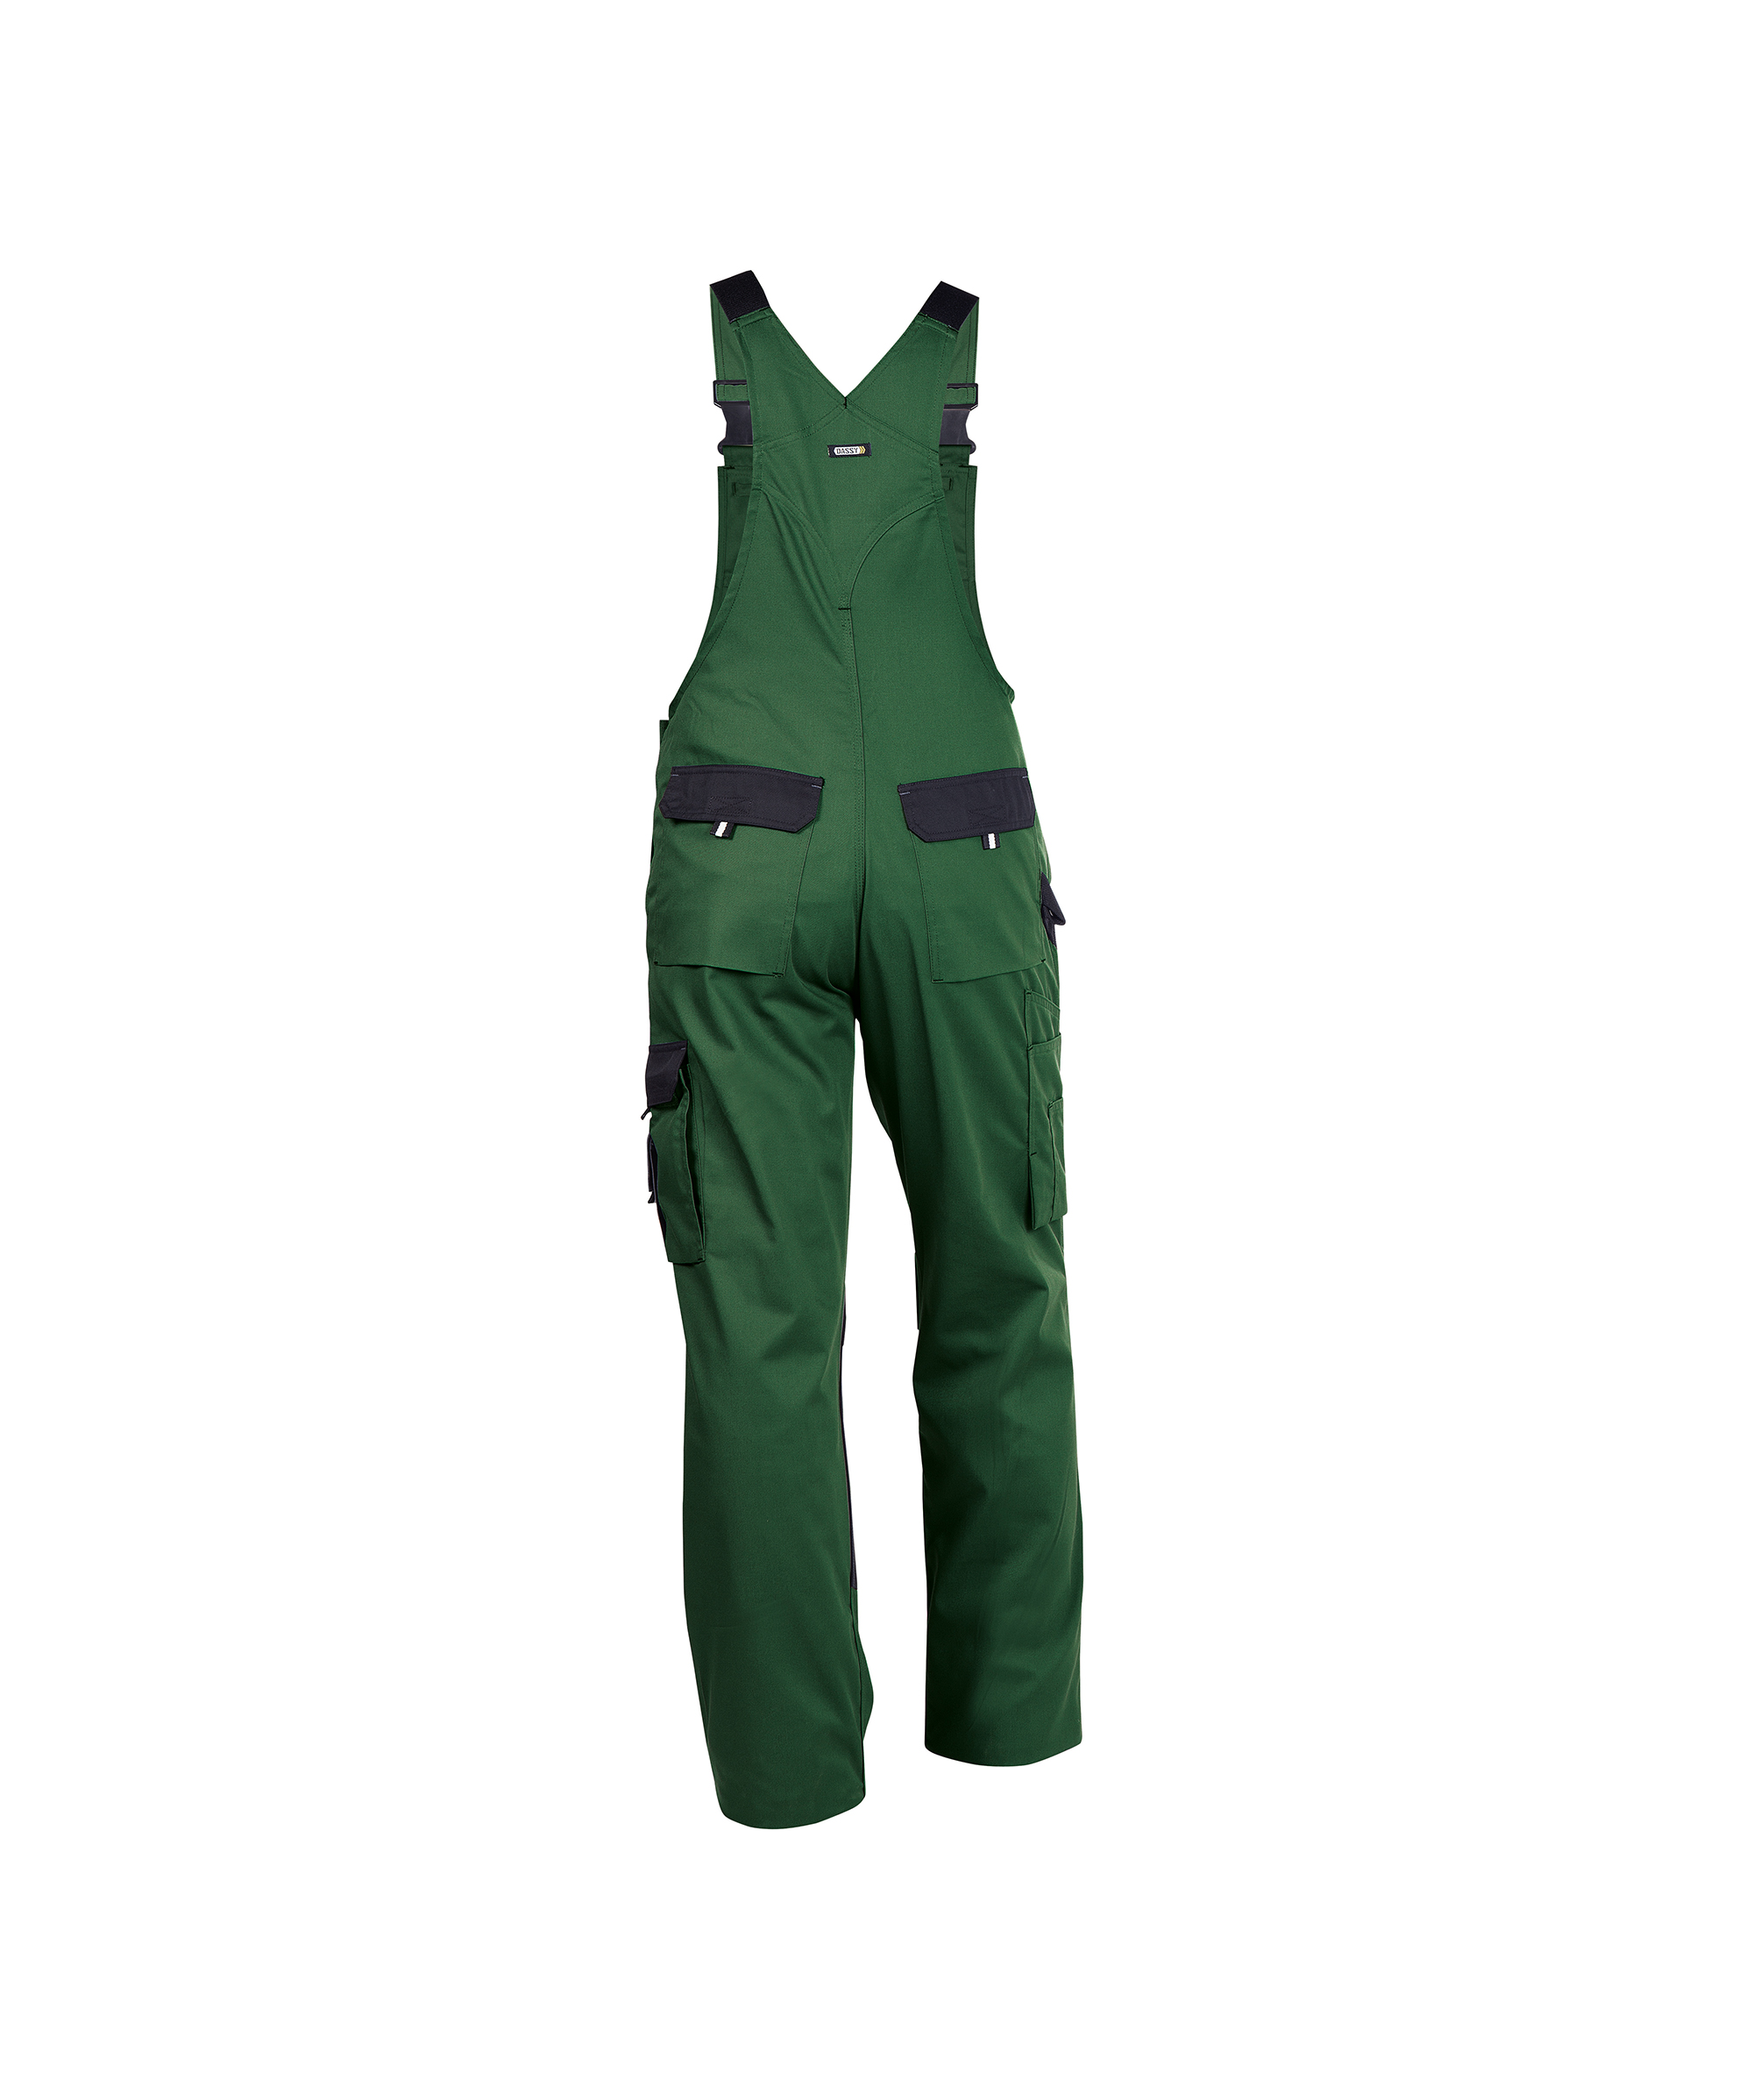 versailles_two-tone-brace-overall-with-knee-pockets_bottle-green-black_back.jpg